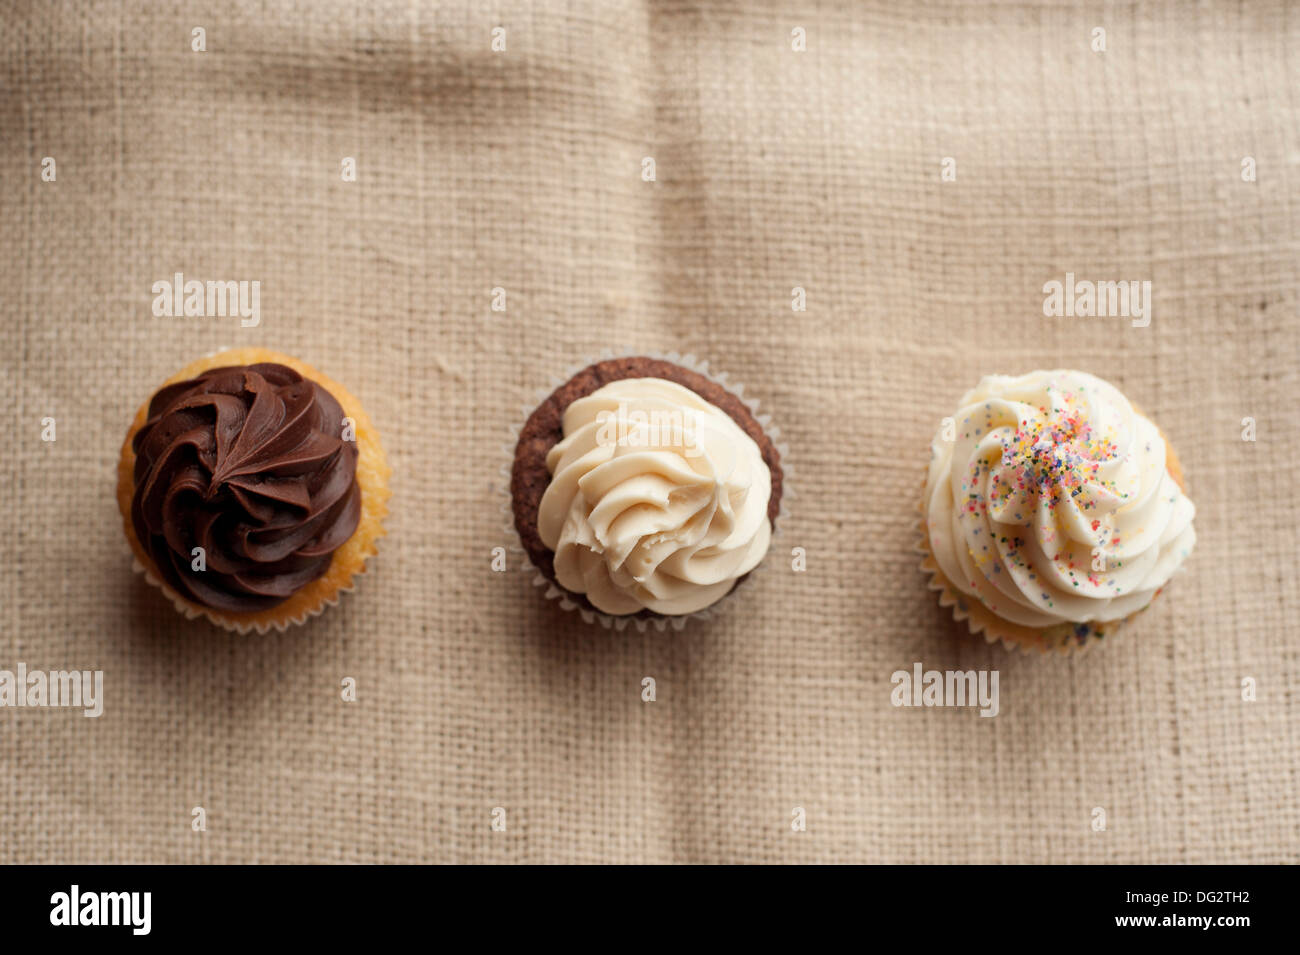 Three Cupcakes with Icing in Row, High Angle View Stock Photo